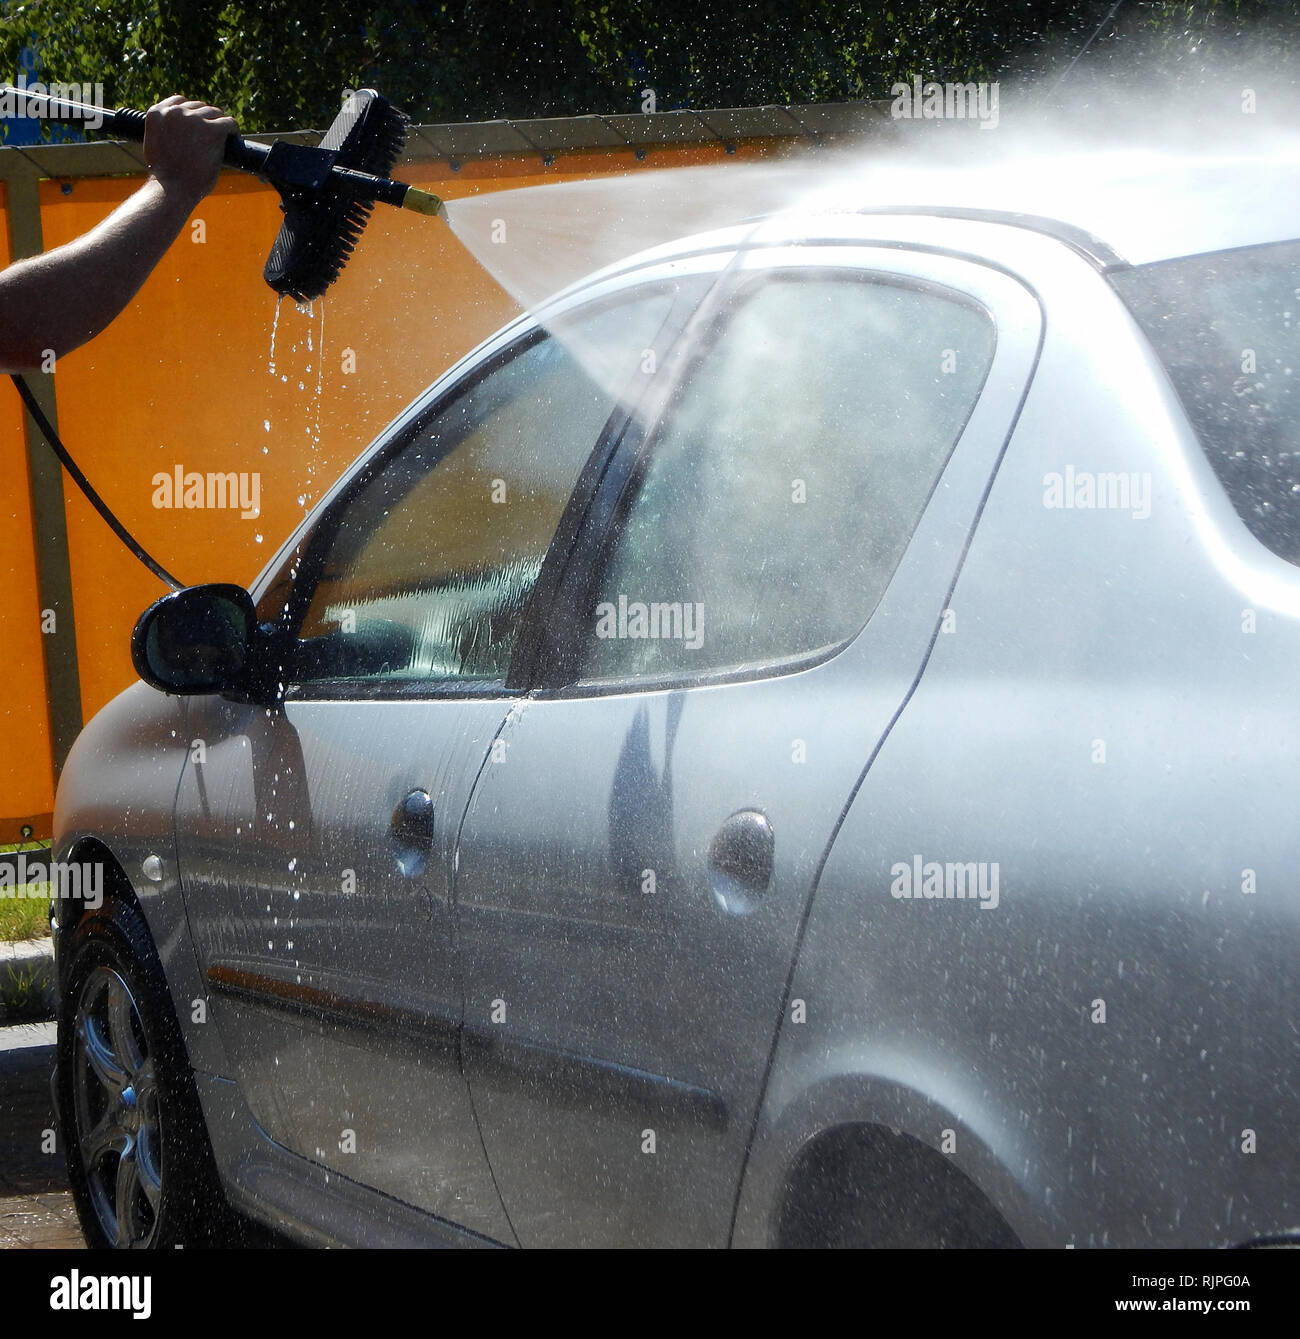 Water spray from high pressure jet washer cleaning car windows Stock Photo